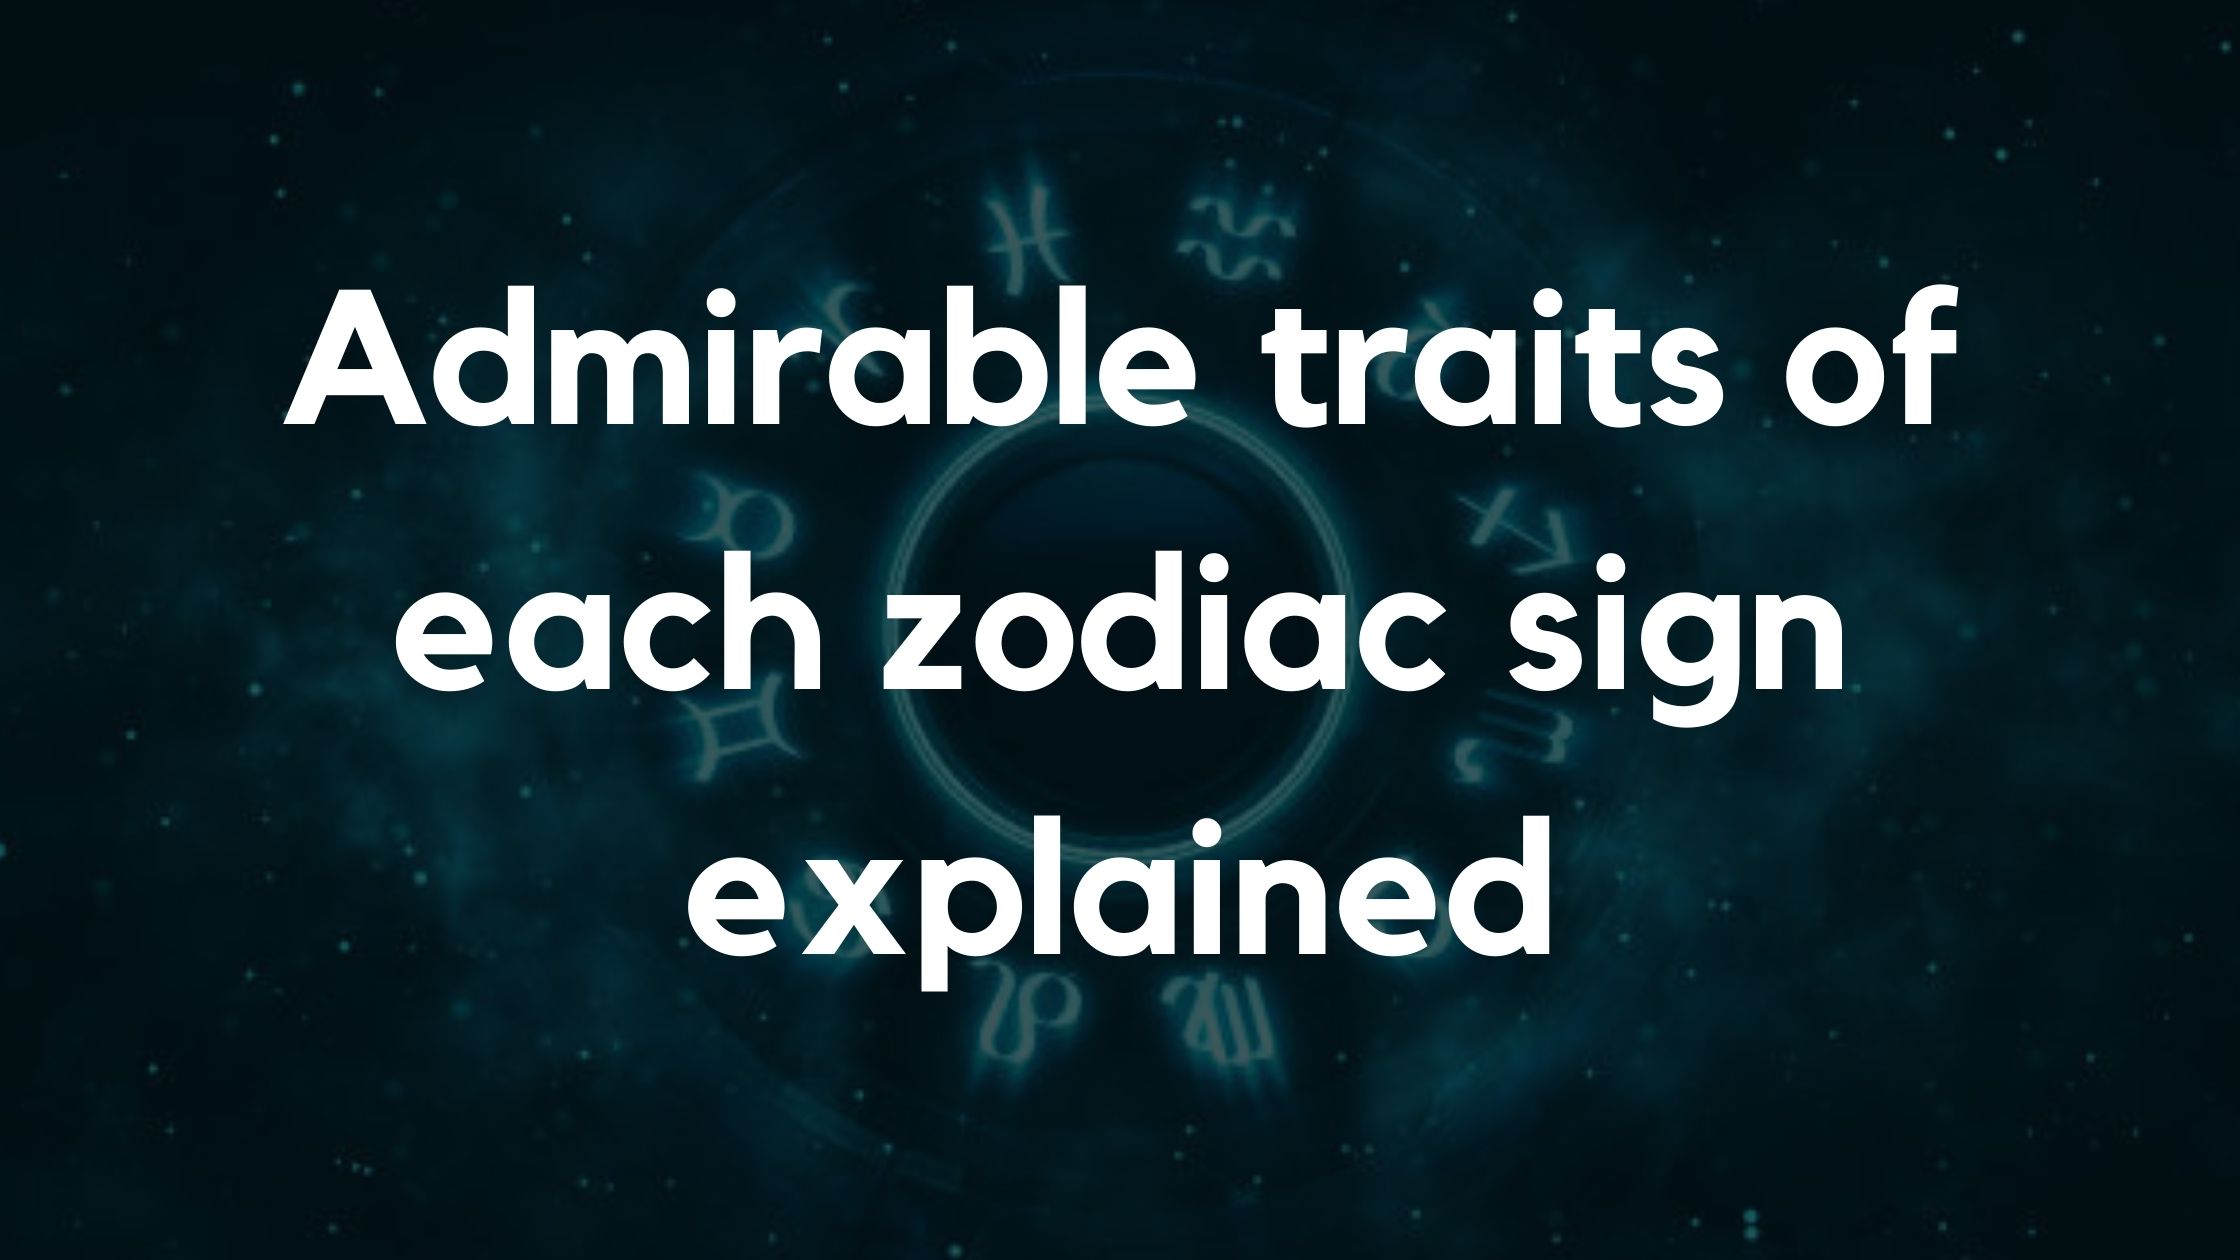 Admirable traits of each zodiac sign explained